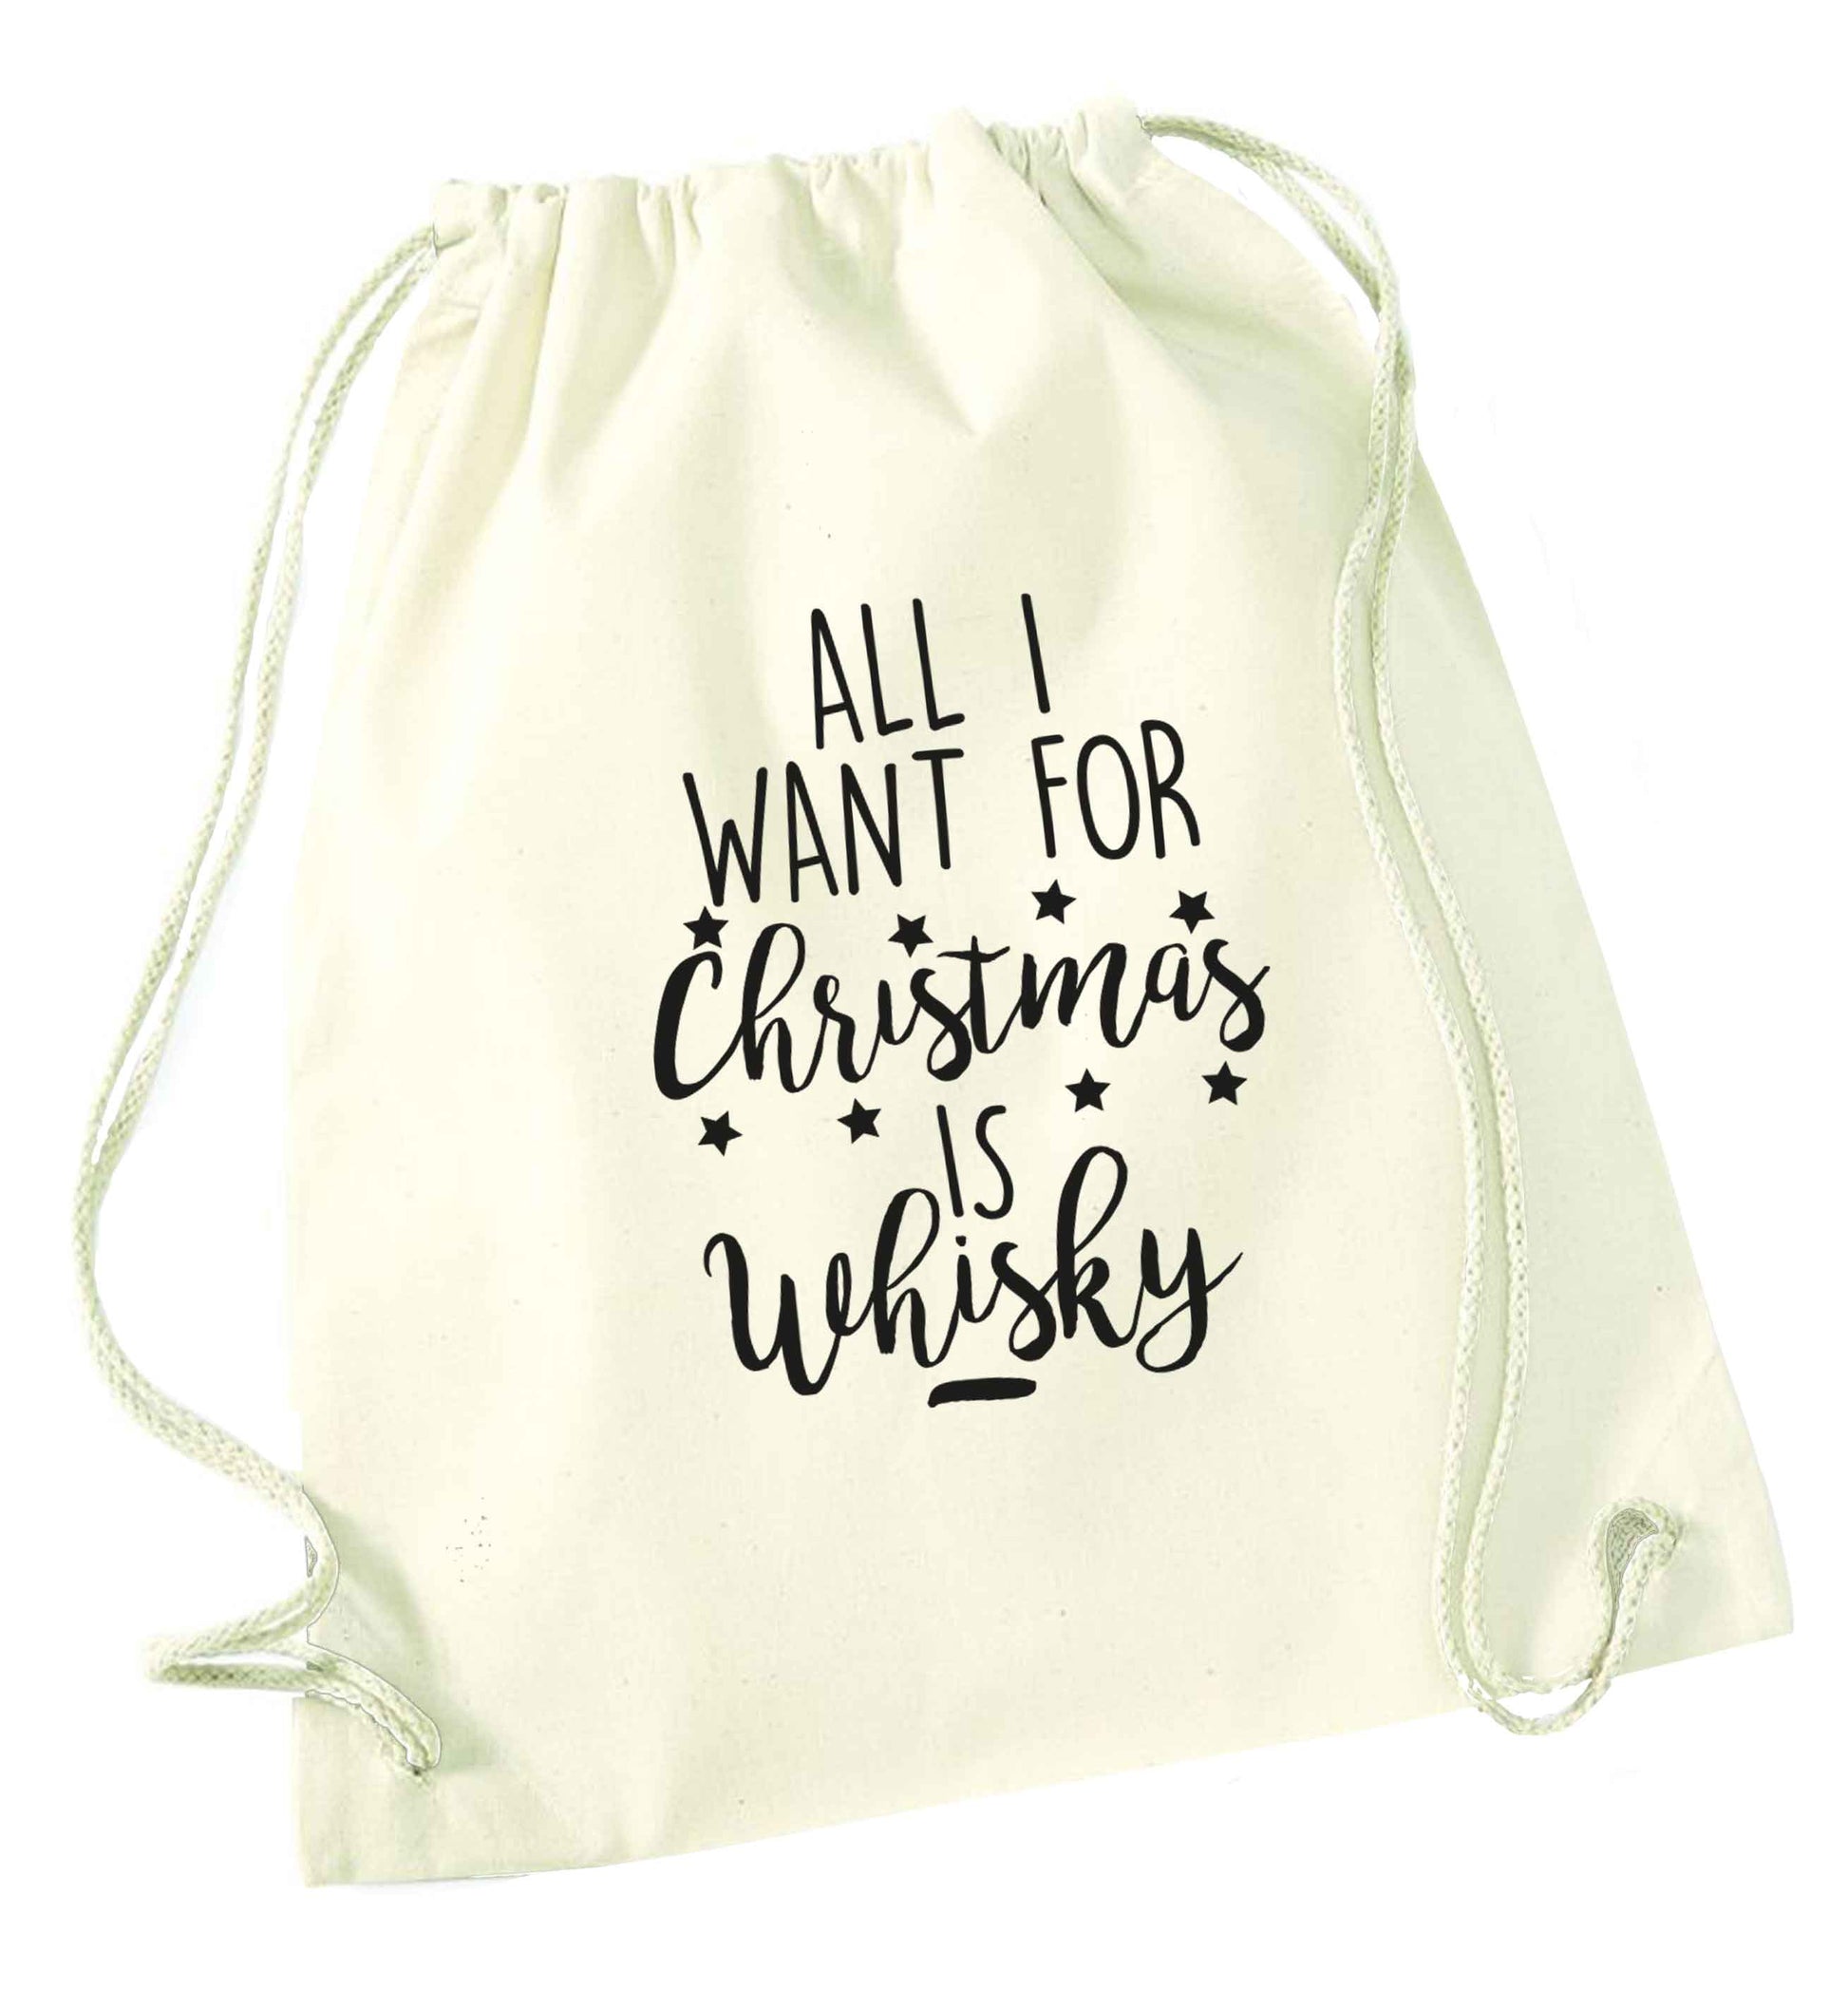 All I want for Christmas is whisky natural drawstring bag